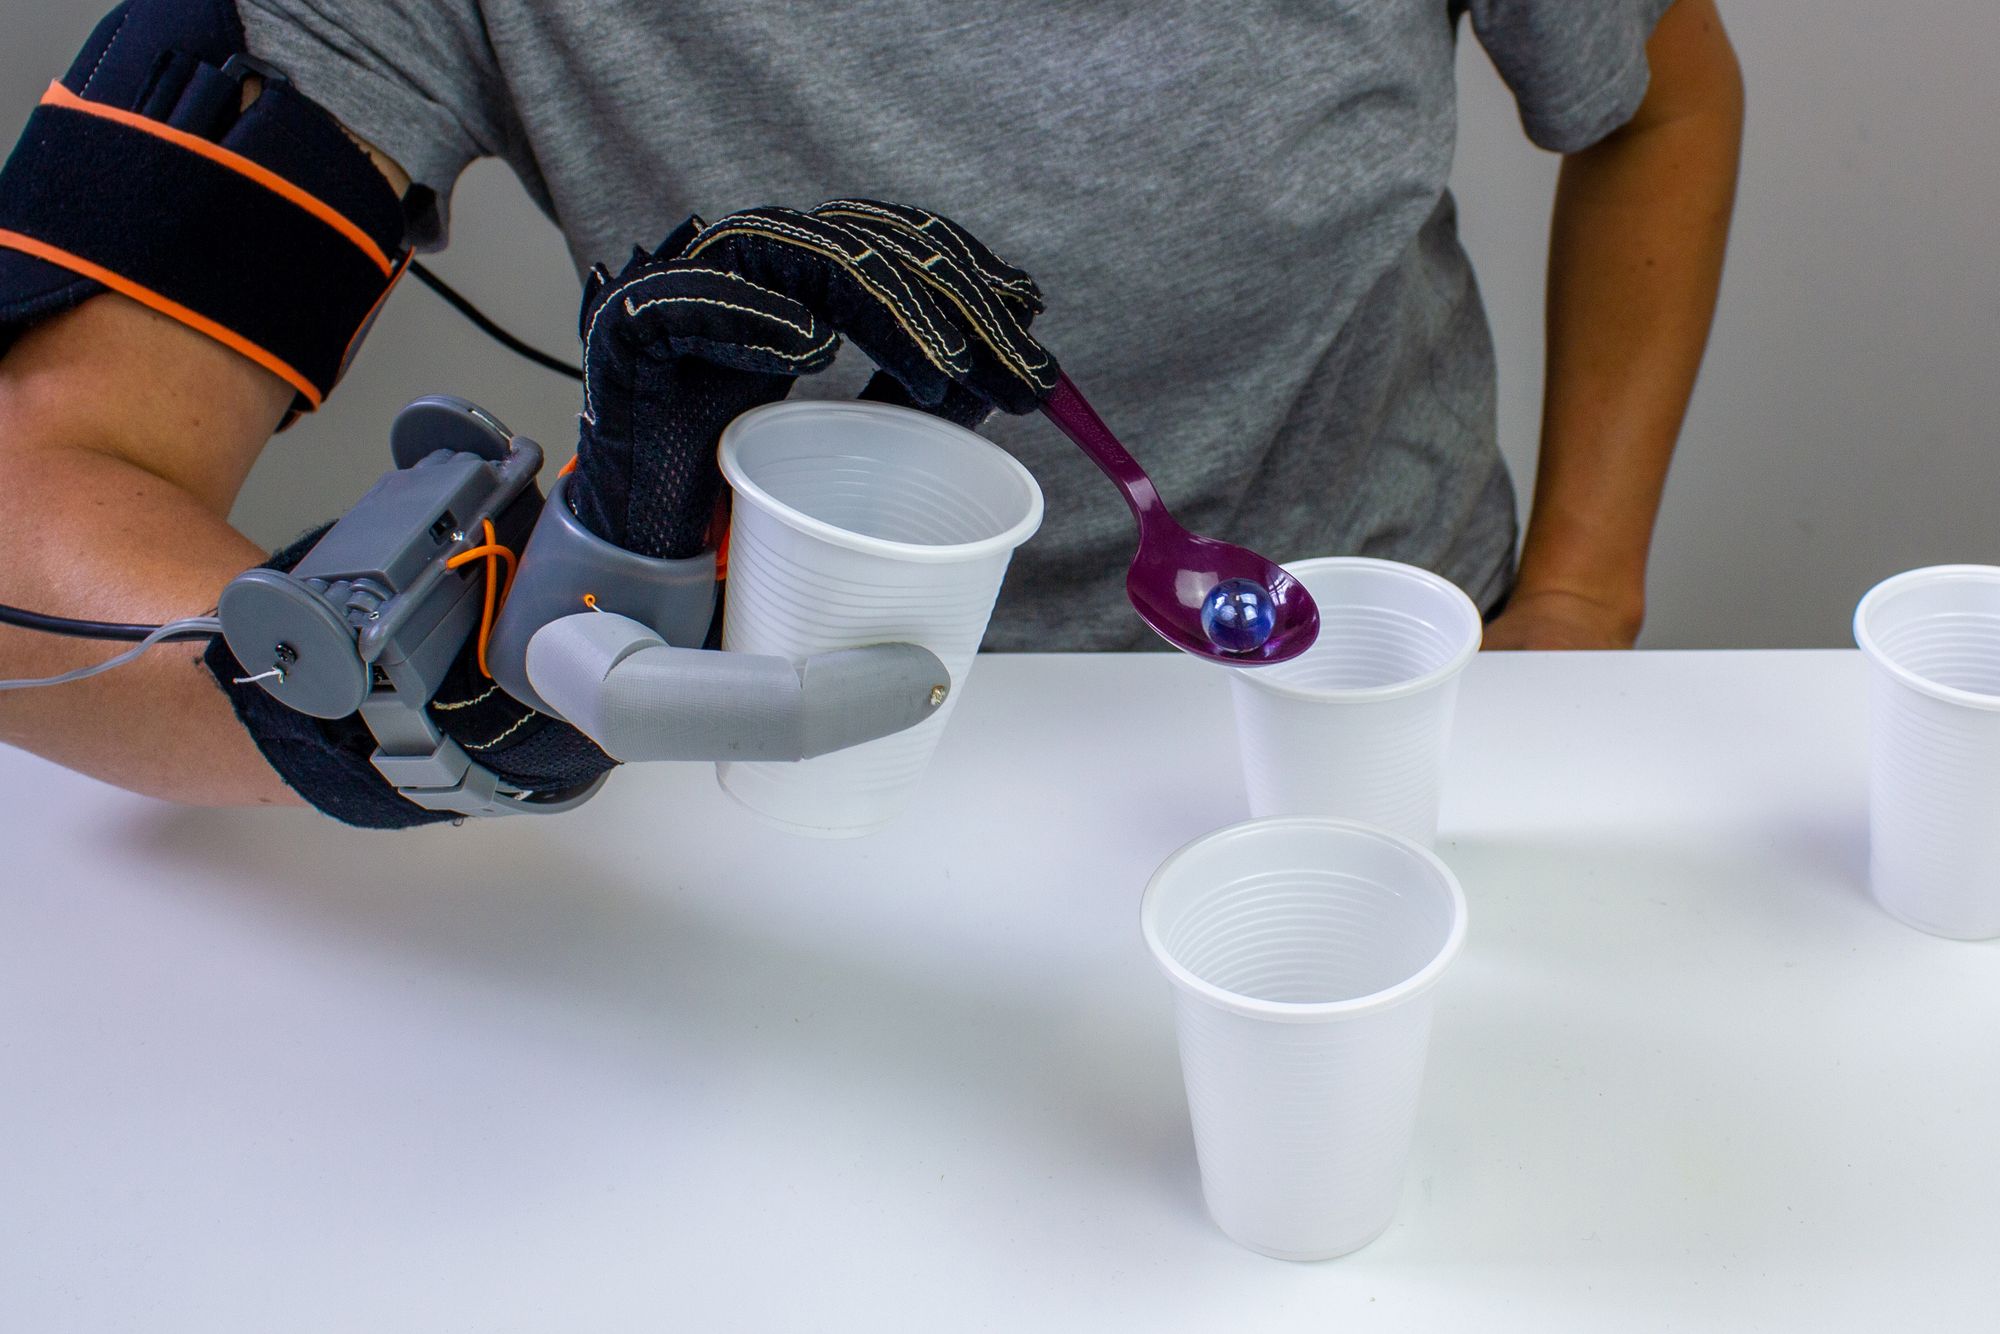 A person is demonstrating the third thumb glove invention by using one hand to hold a cup and a spoon at the same time. The hand is spooning a marble and there are several cups on the table.